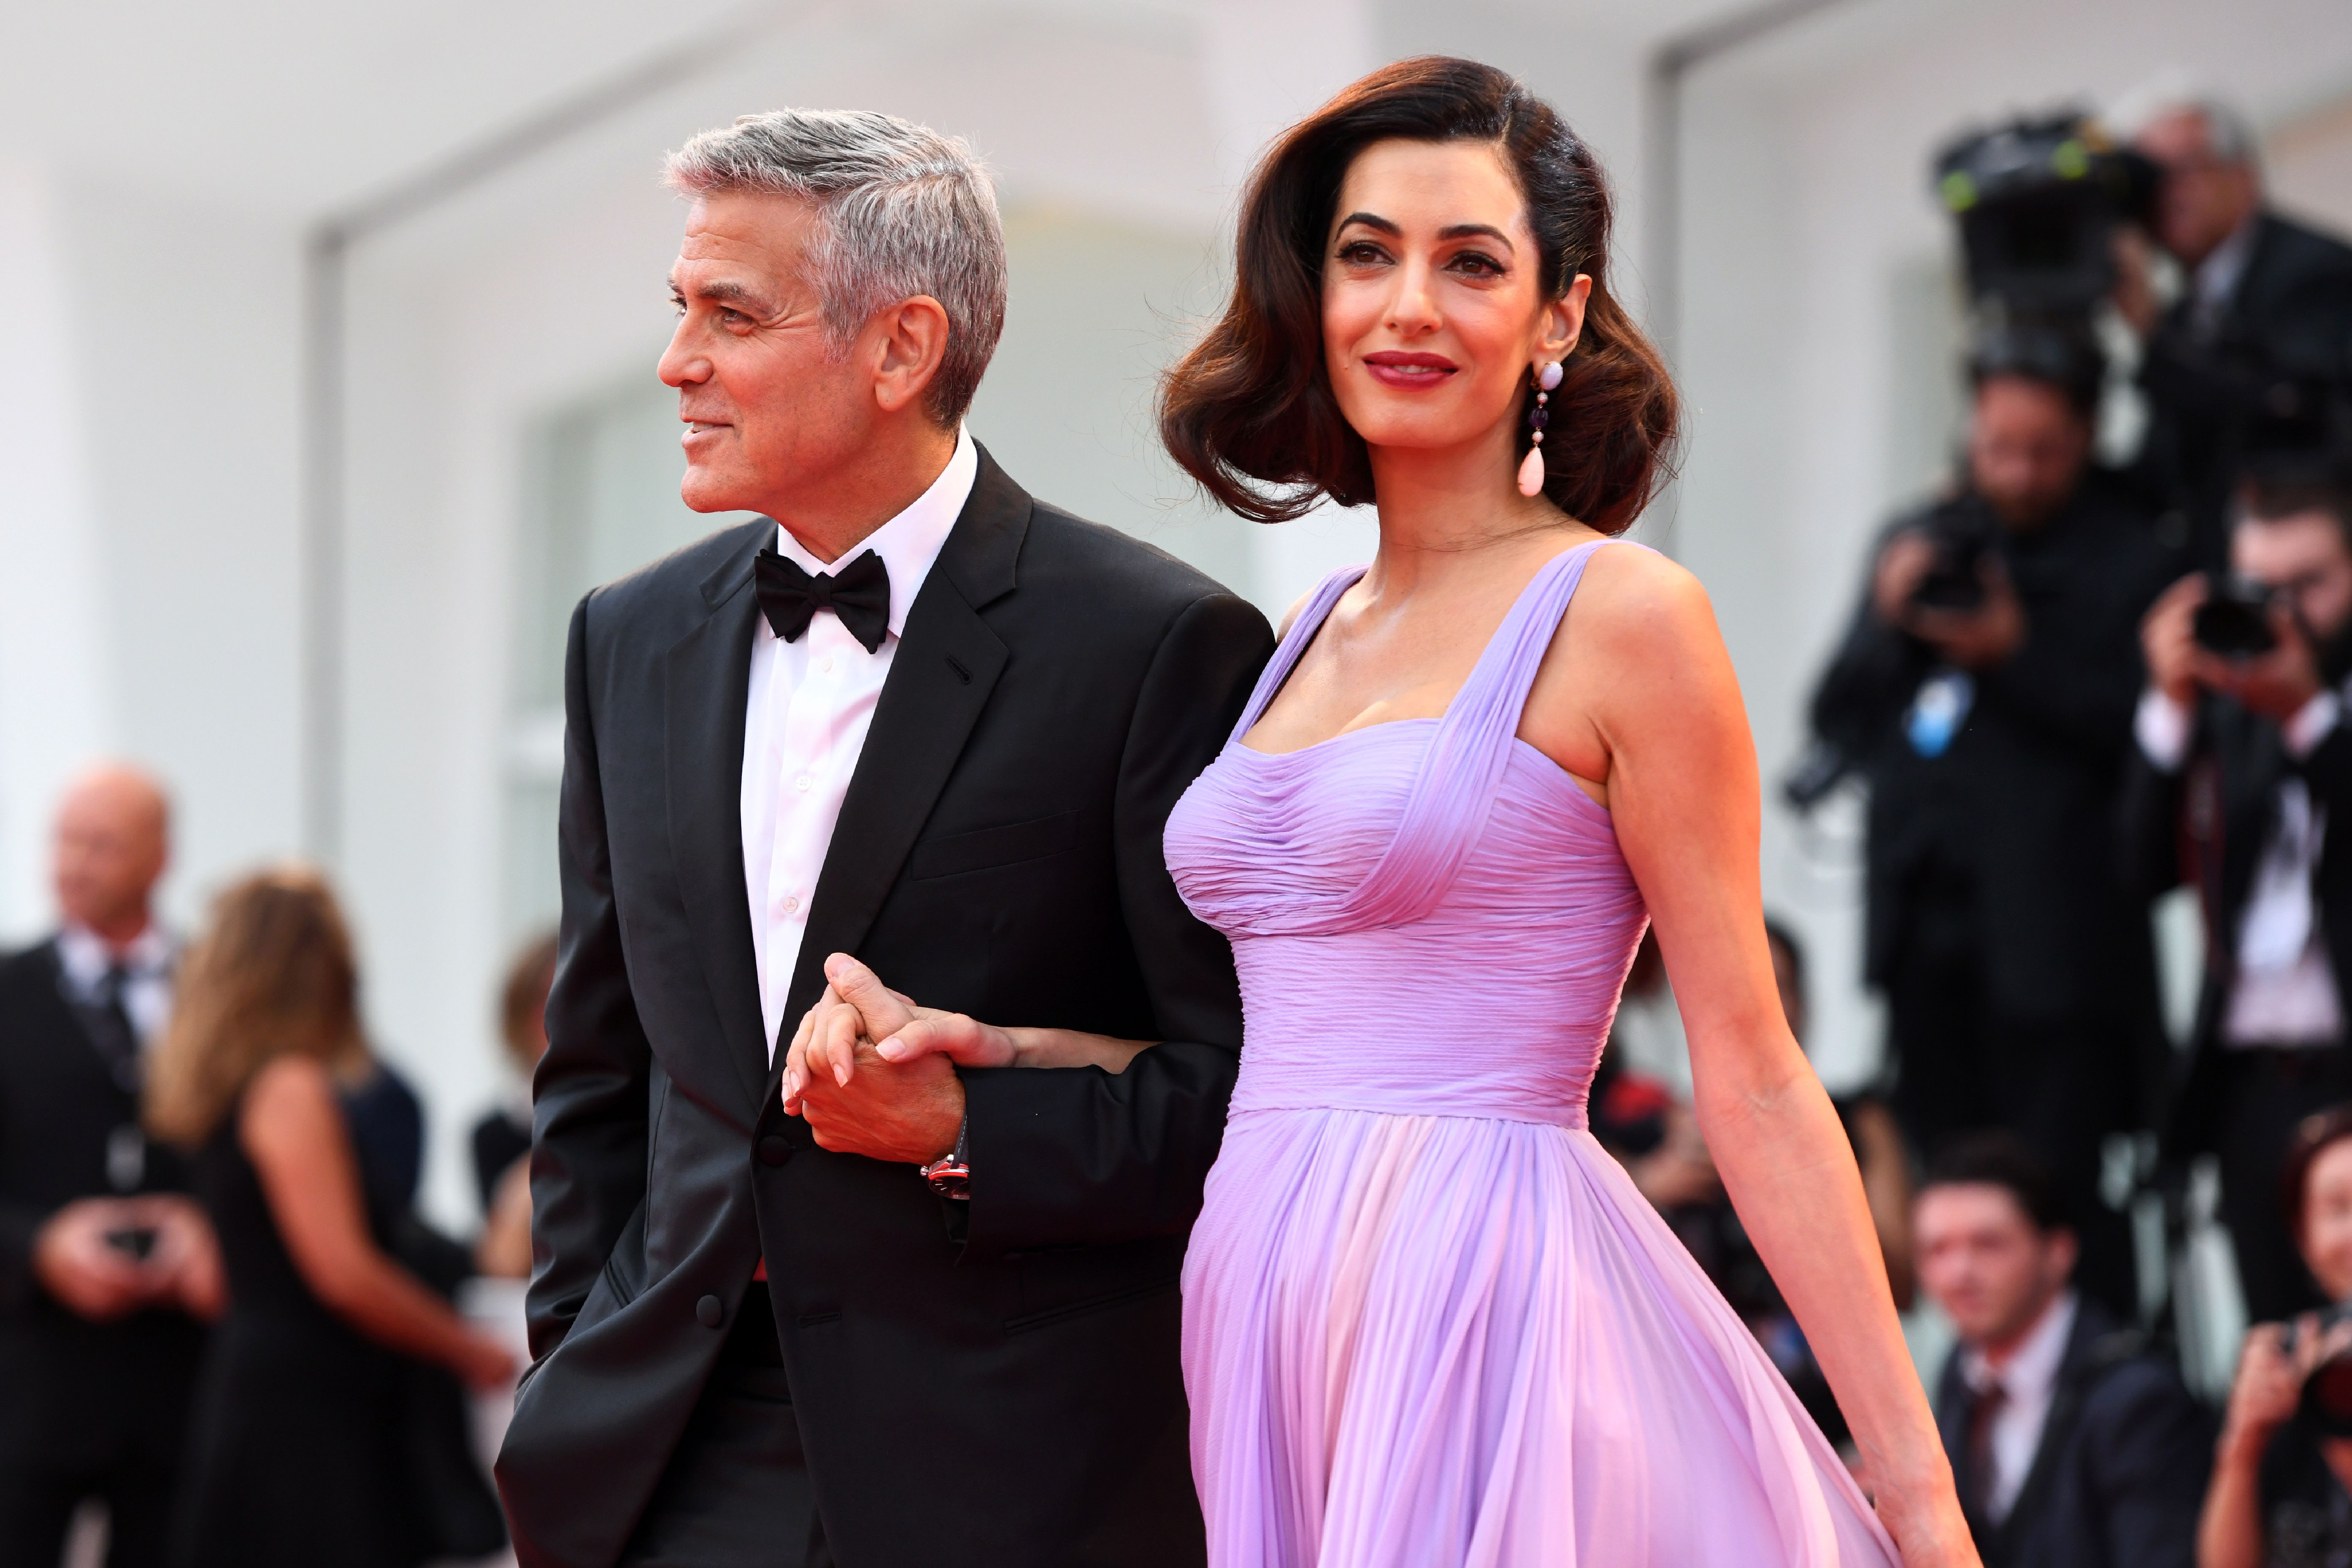 George Clooney and his wife Amal attend the premiere of the movie "Suburbicon" presented out of competition at the 74th Venice Film Festival on September 2, 2017 at Venice Lido | Source: Getty Images 